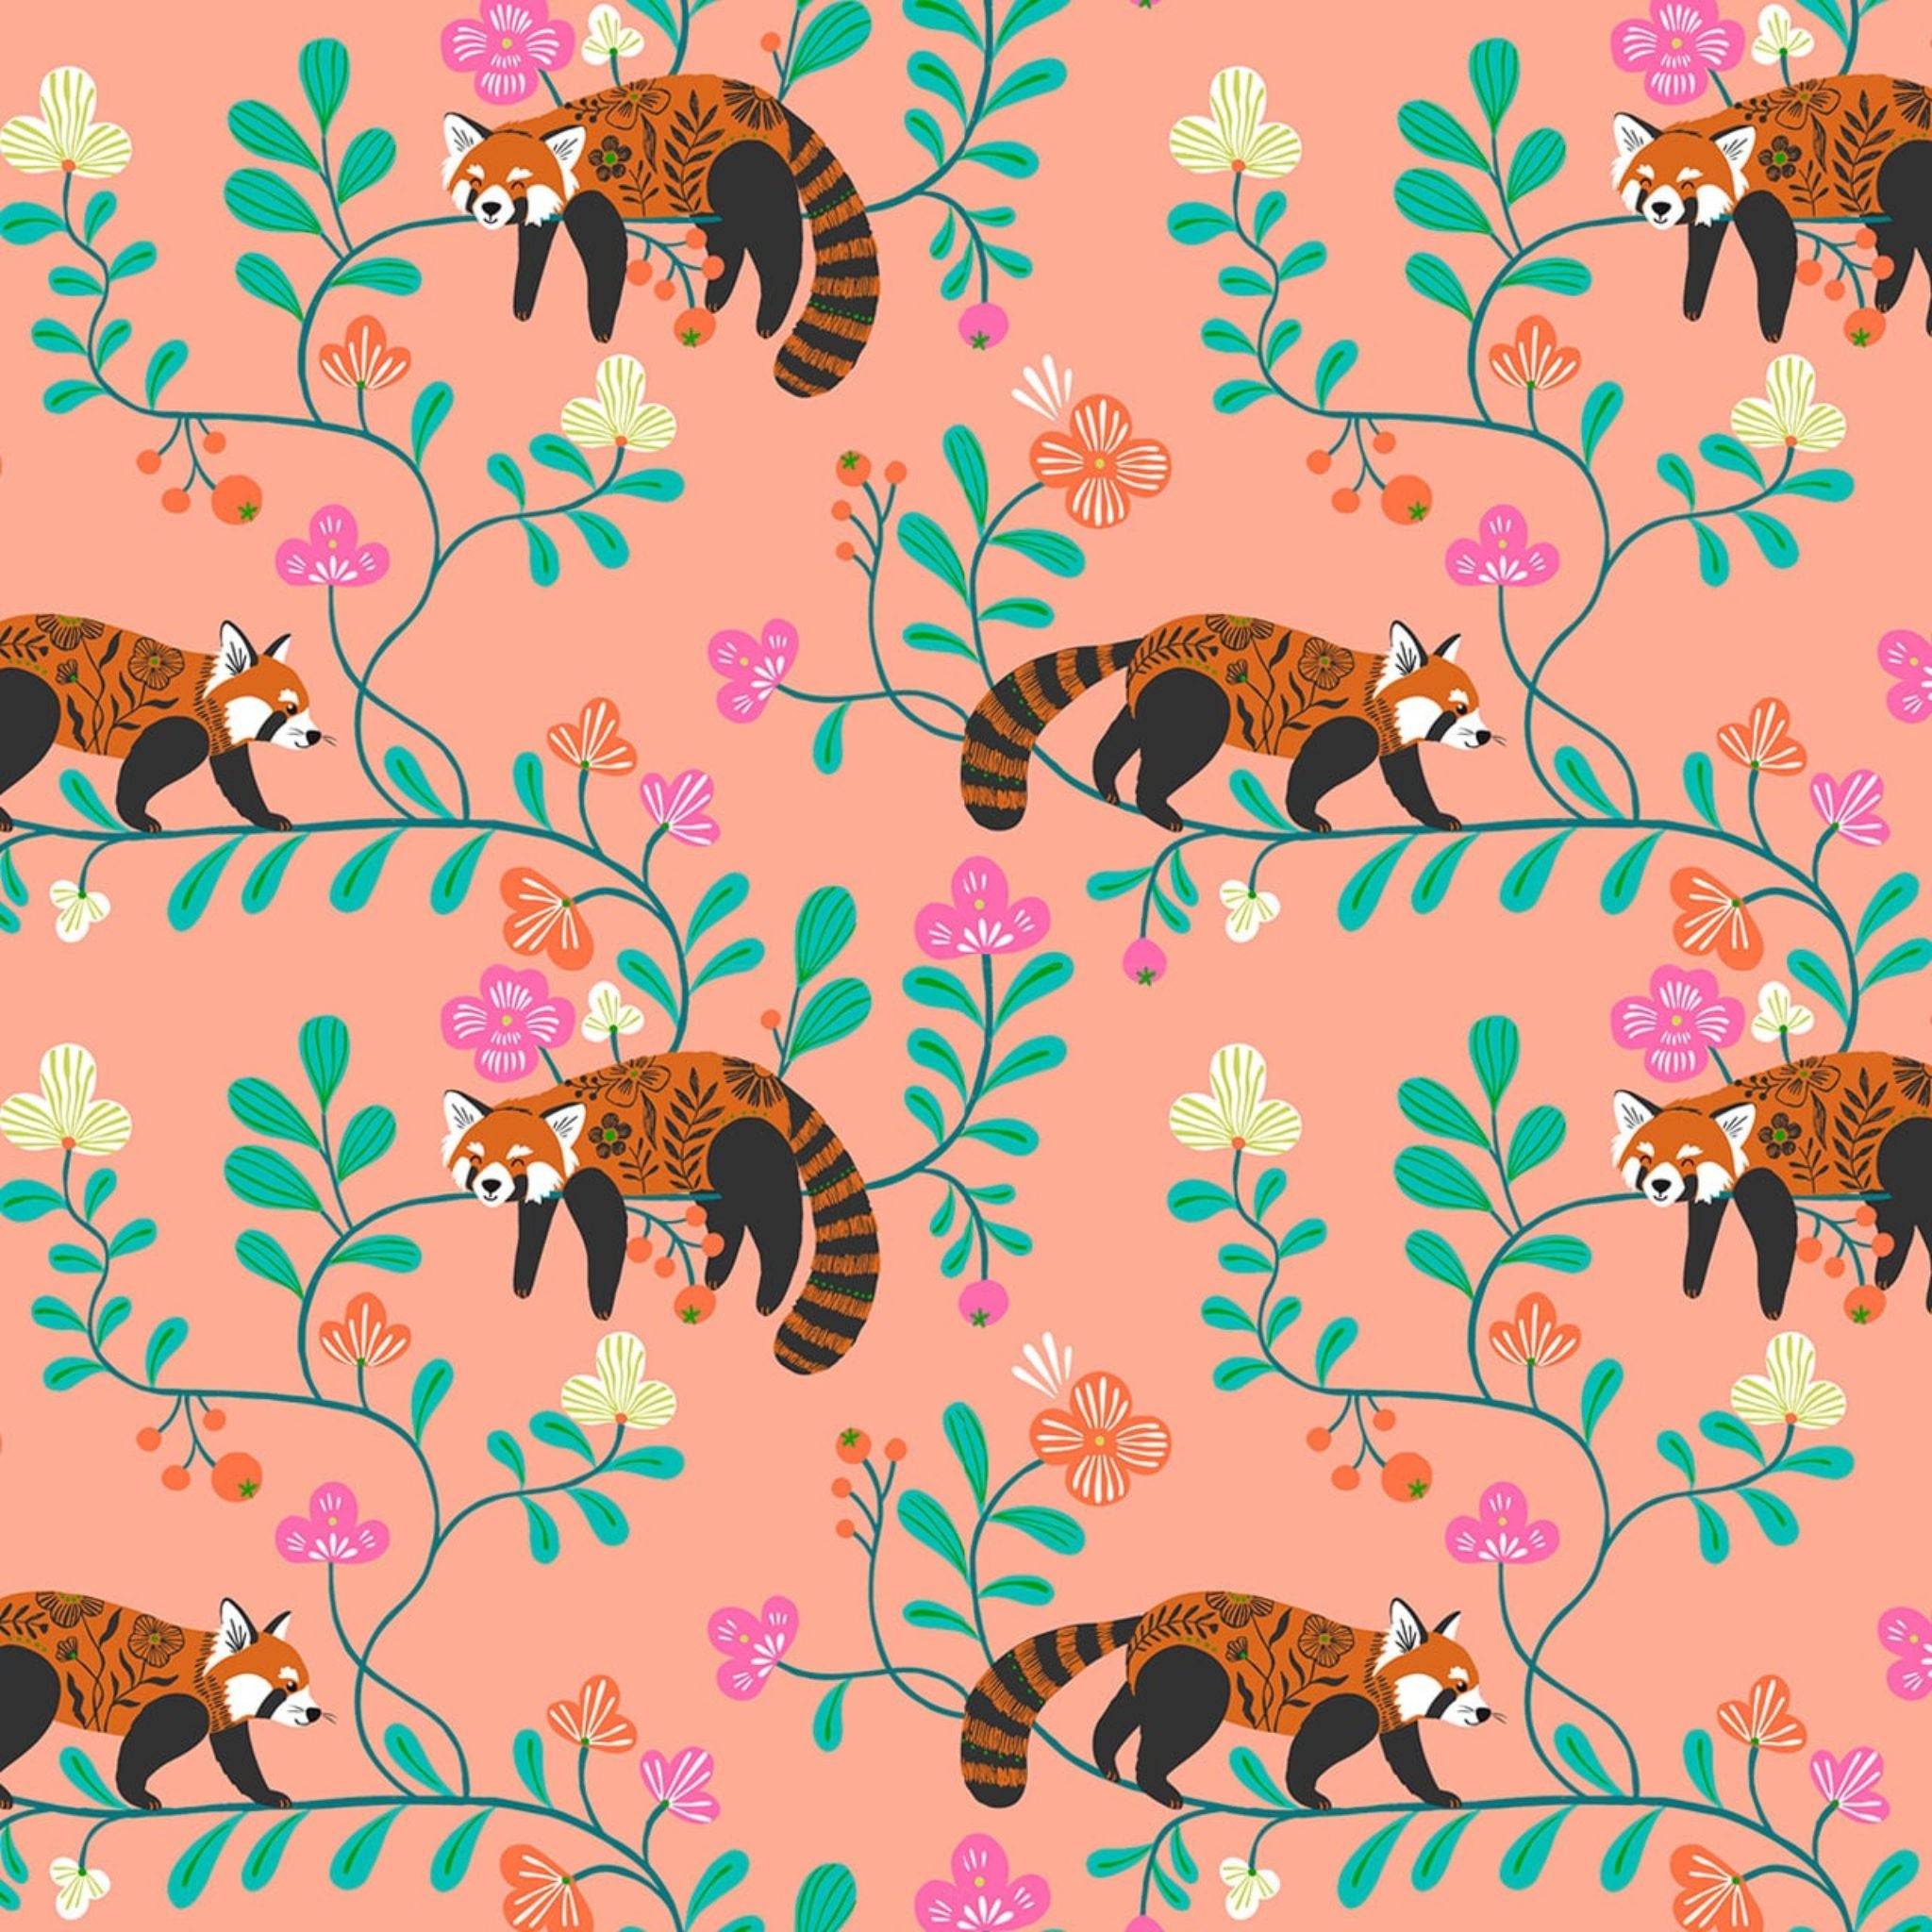 Red pandas on a coral Chinese inspired cotton fabric - Blossom Days - Dashwood Studio